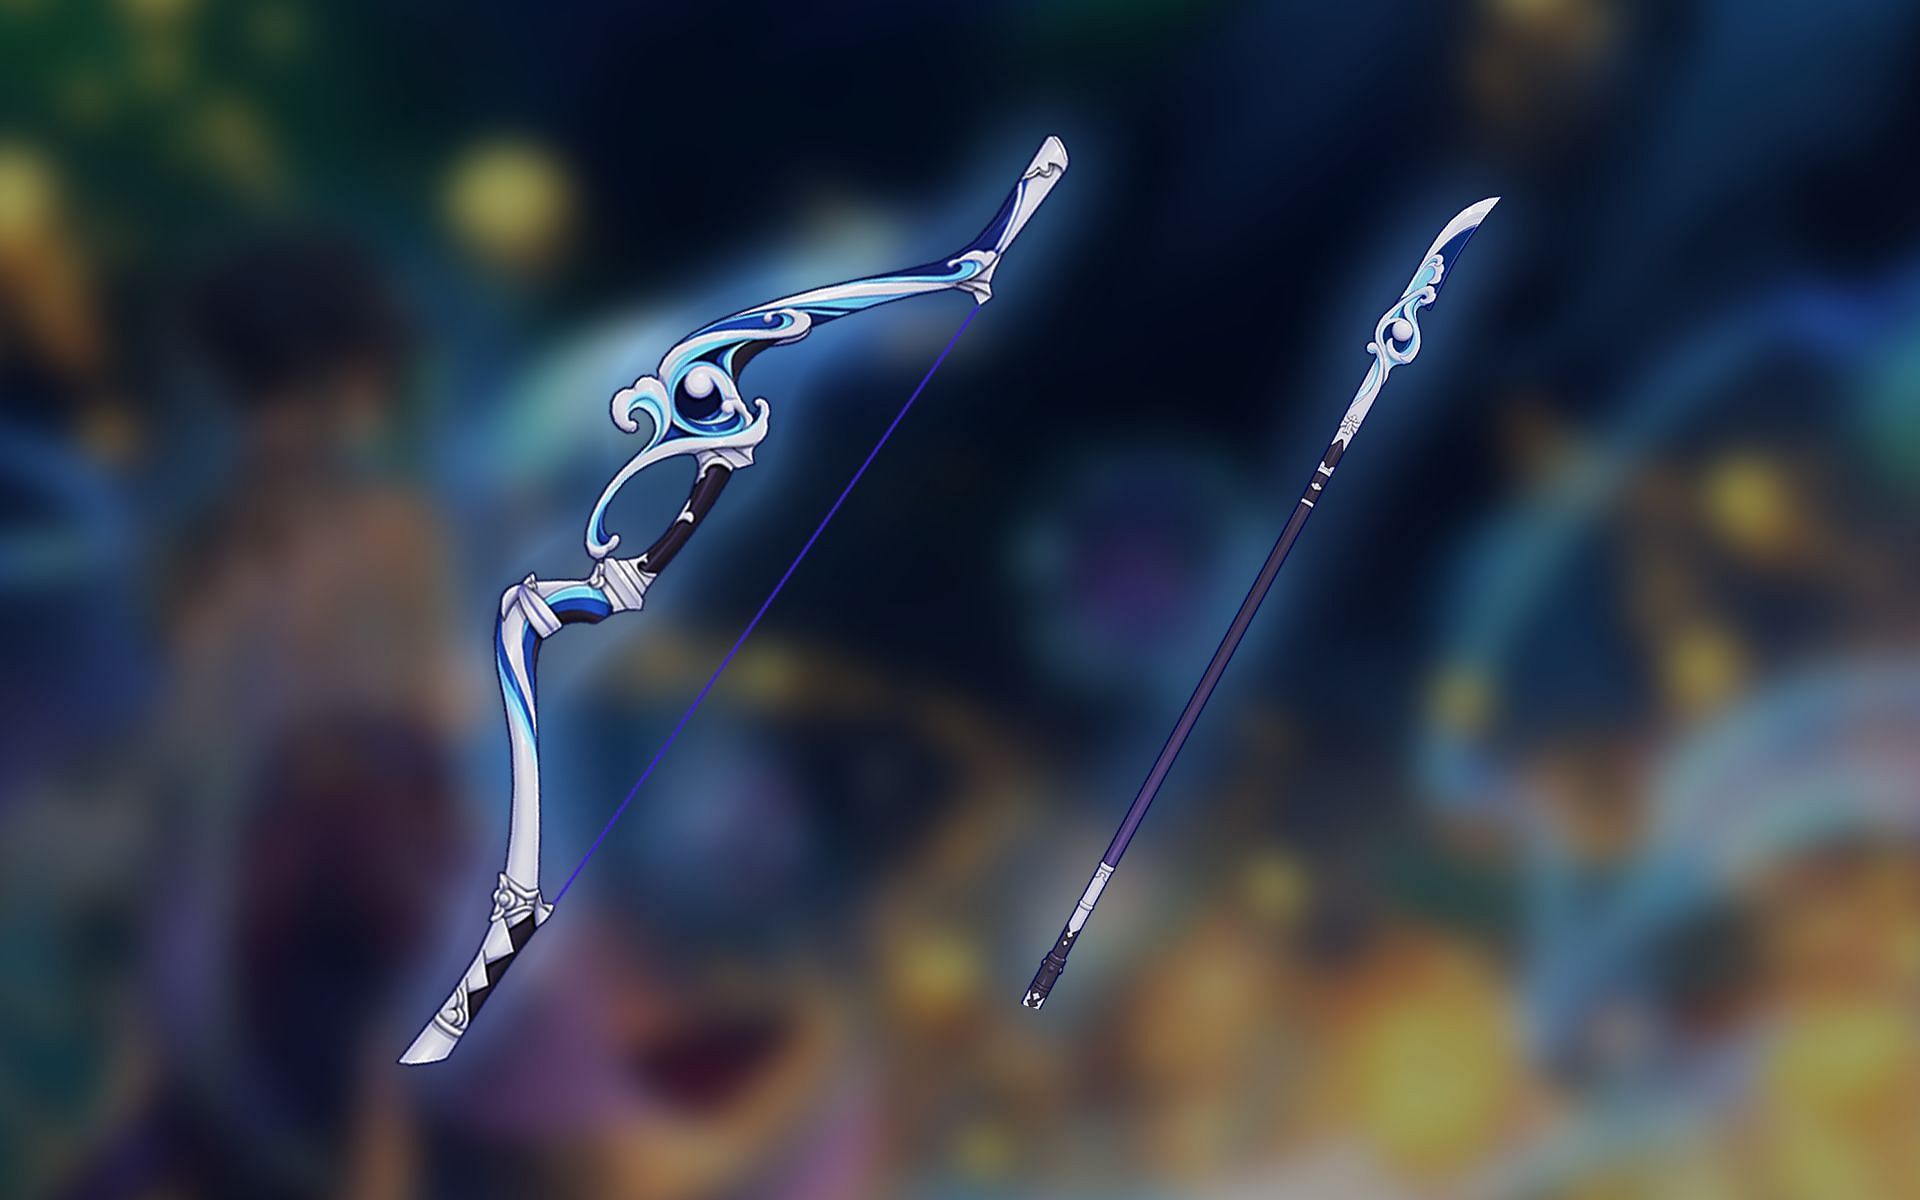 Two new 4-star weapons have been added to Genshin Impact (Image via Sportskeeda)